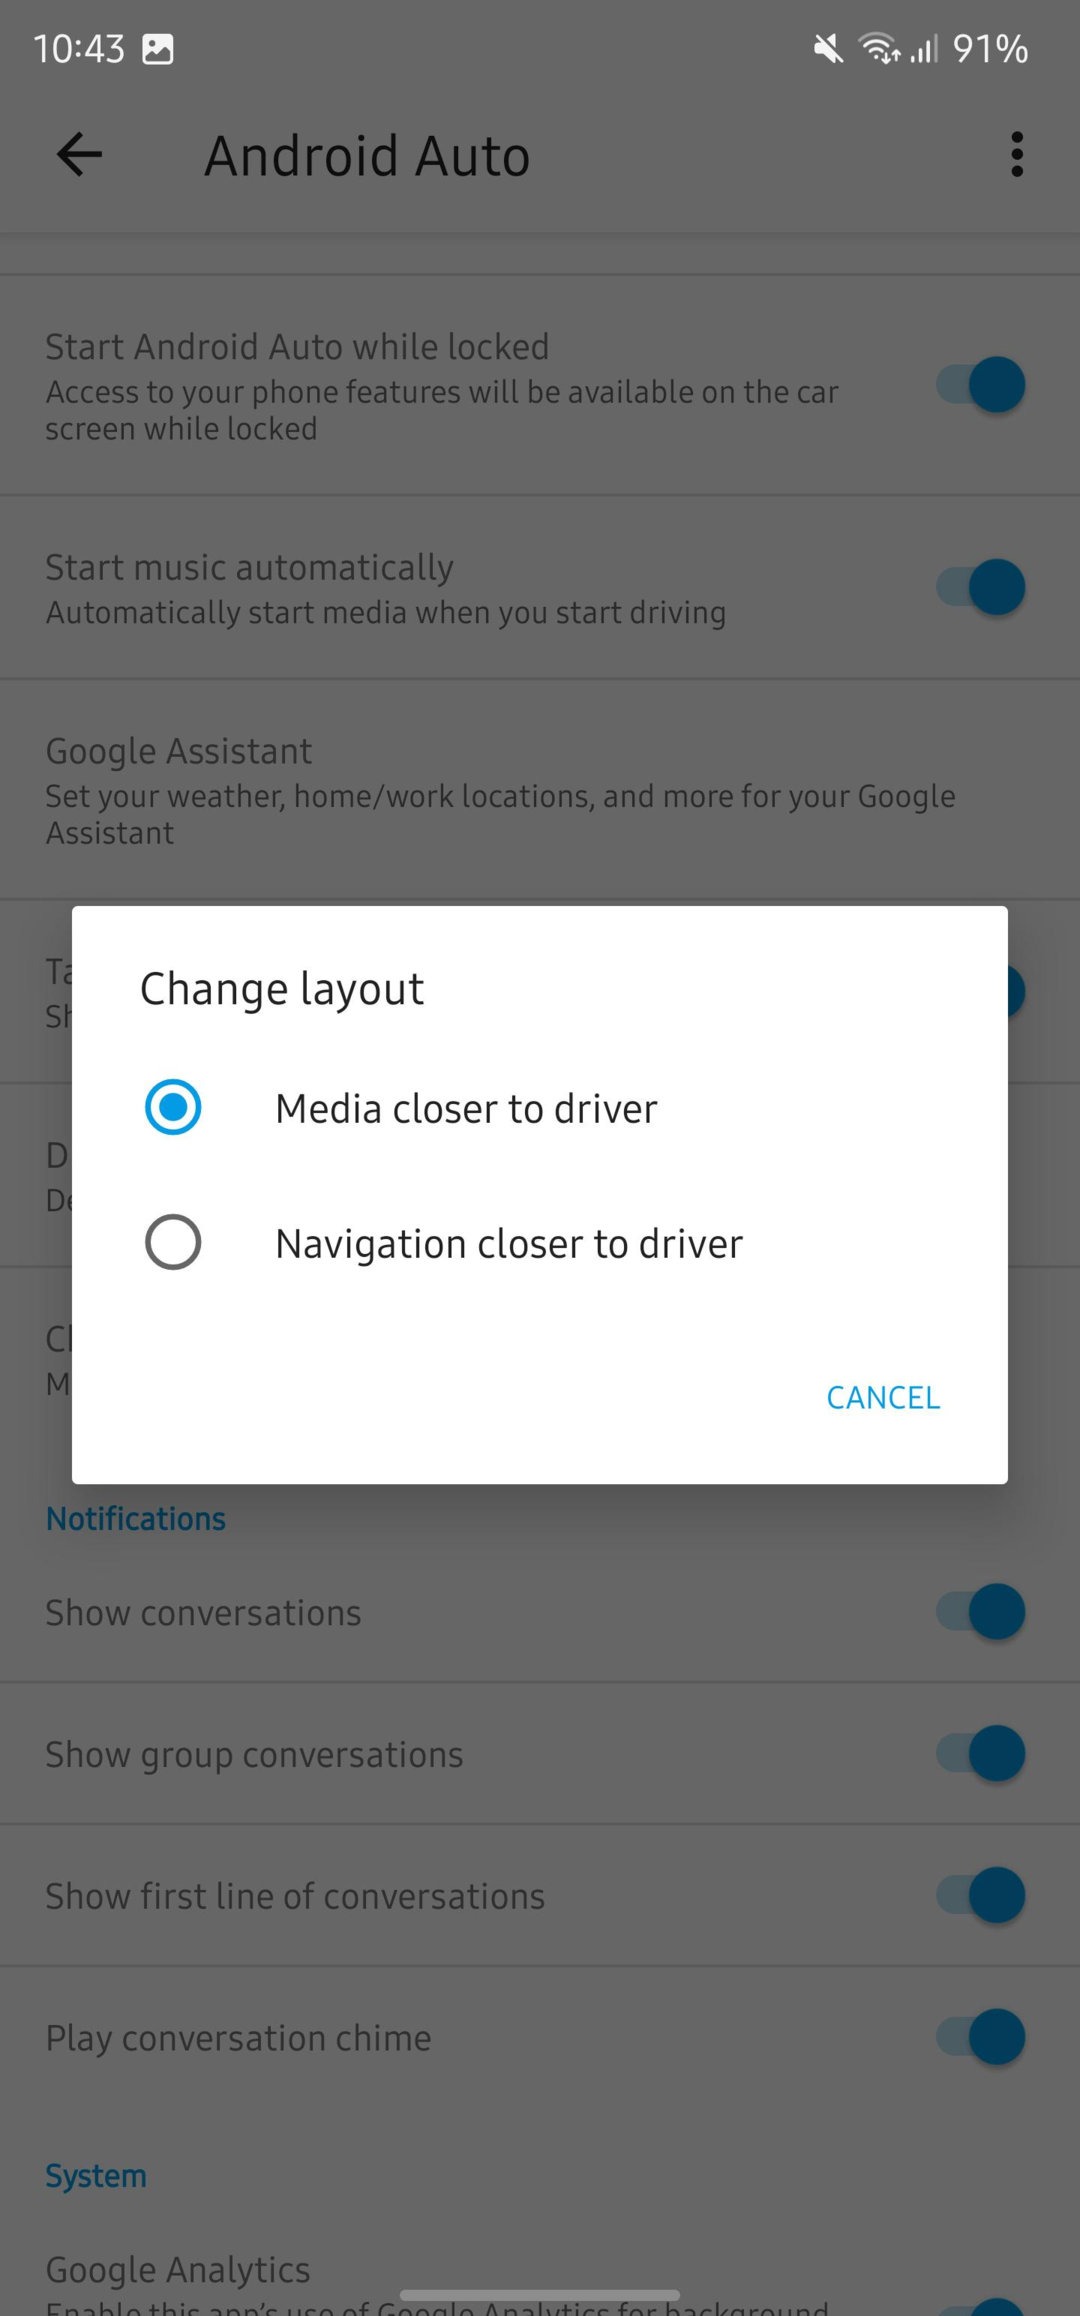 Android Auto 9.1 stable 